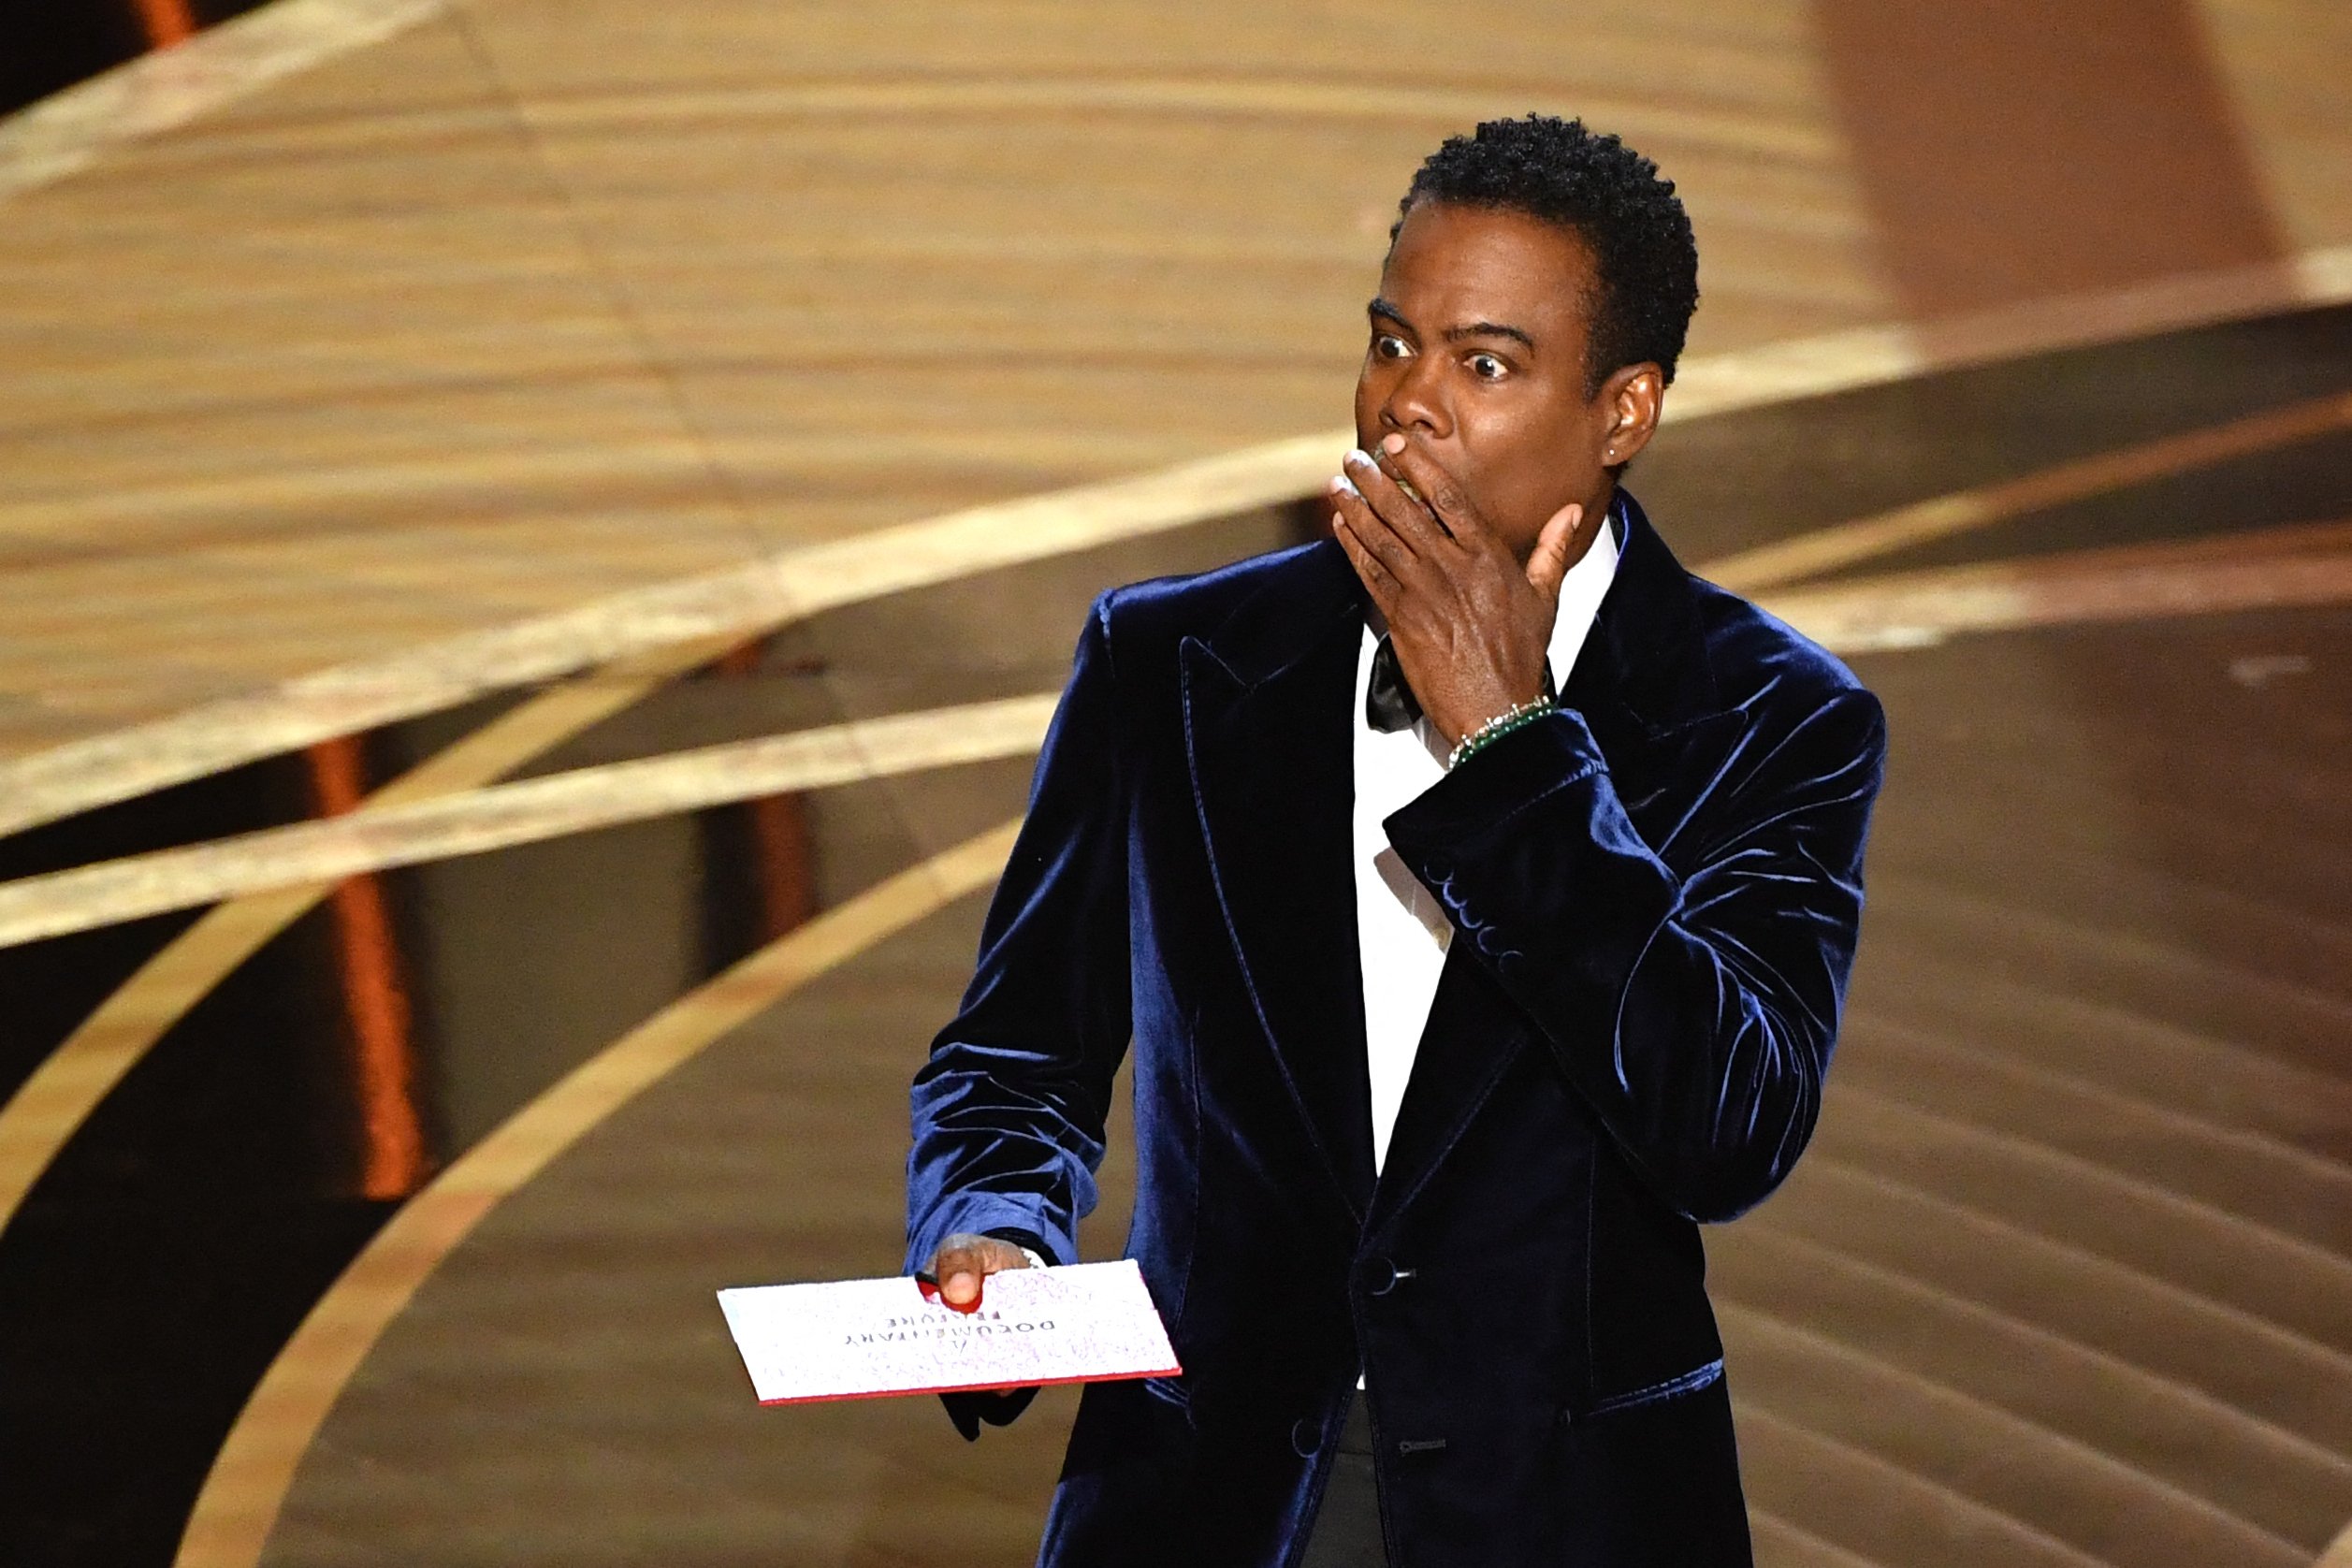 Chris Rock at the 94th Oscars on March 27, 2022 | Source: Getty Images